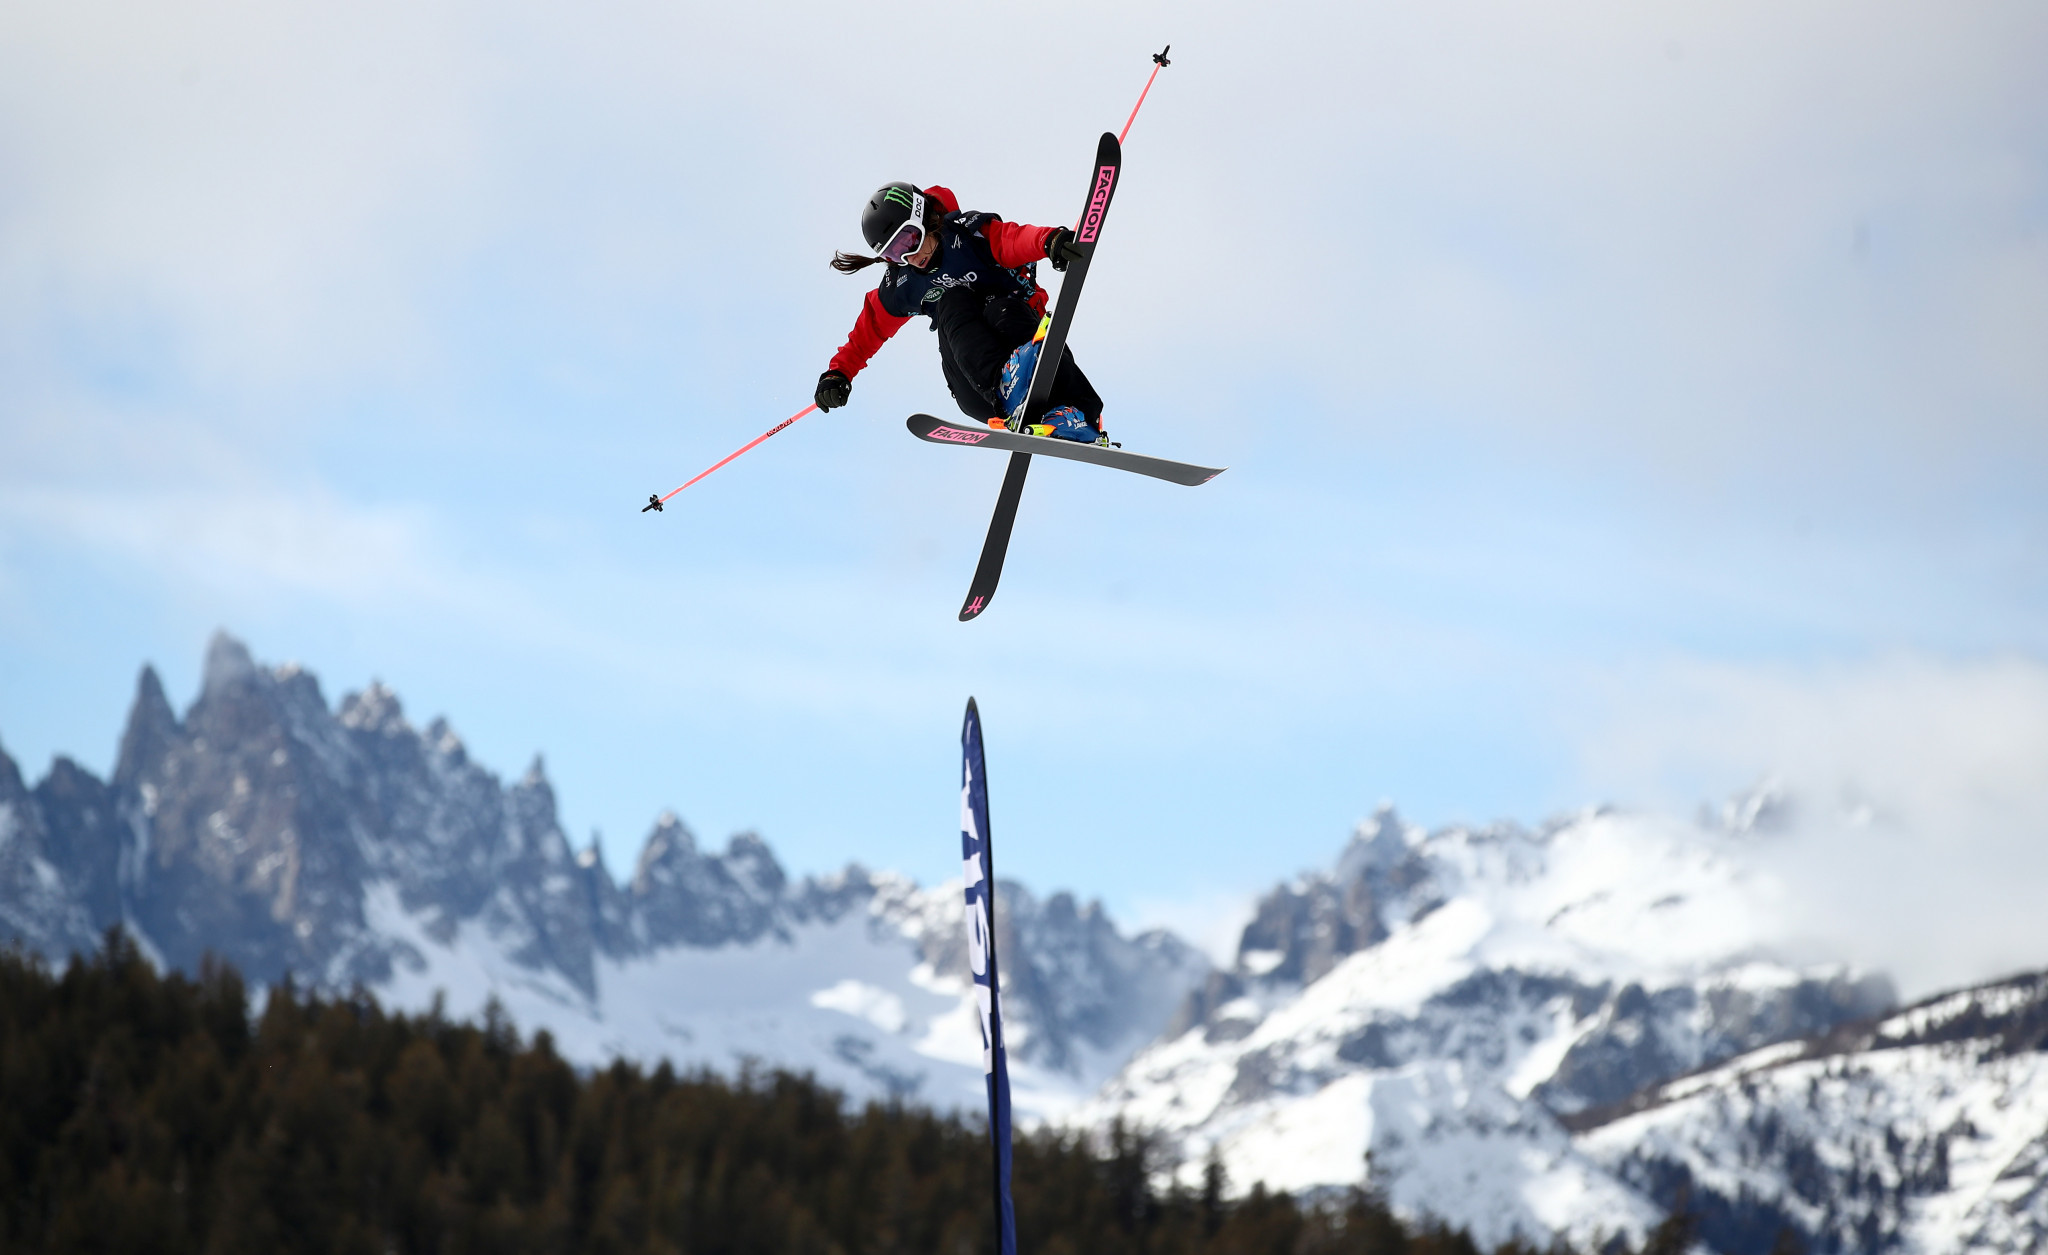 Sarah Hoefflin won the women's FIS World Cup freeski slopestyle event in Mammoth Mountain ©Getty Images